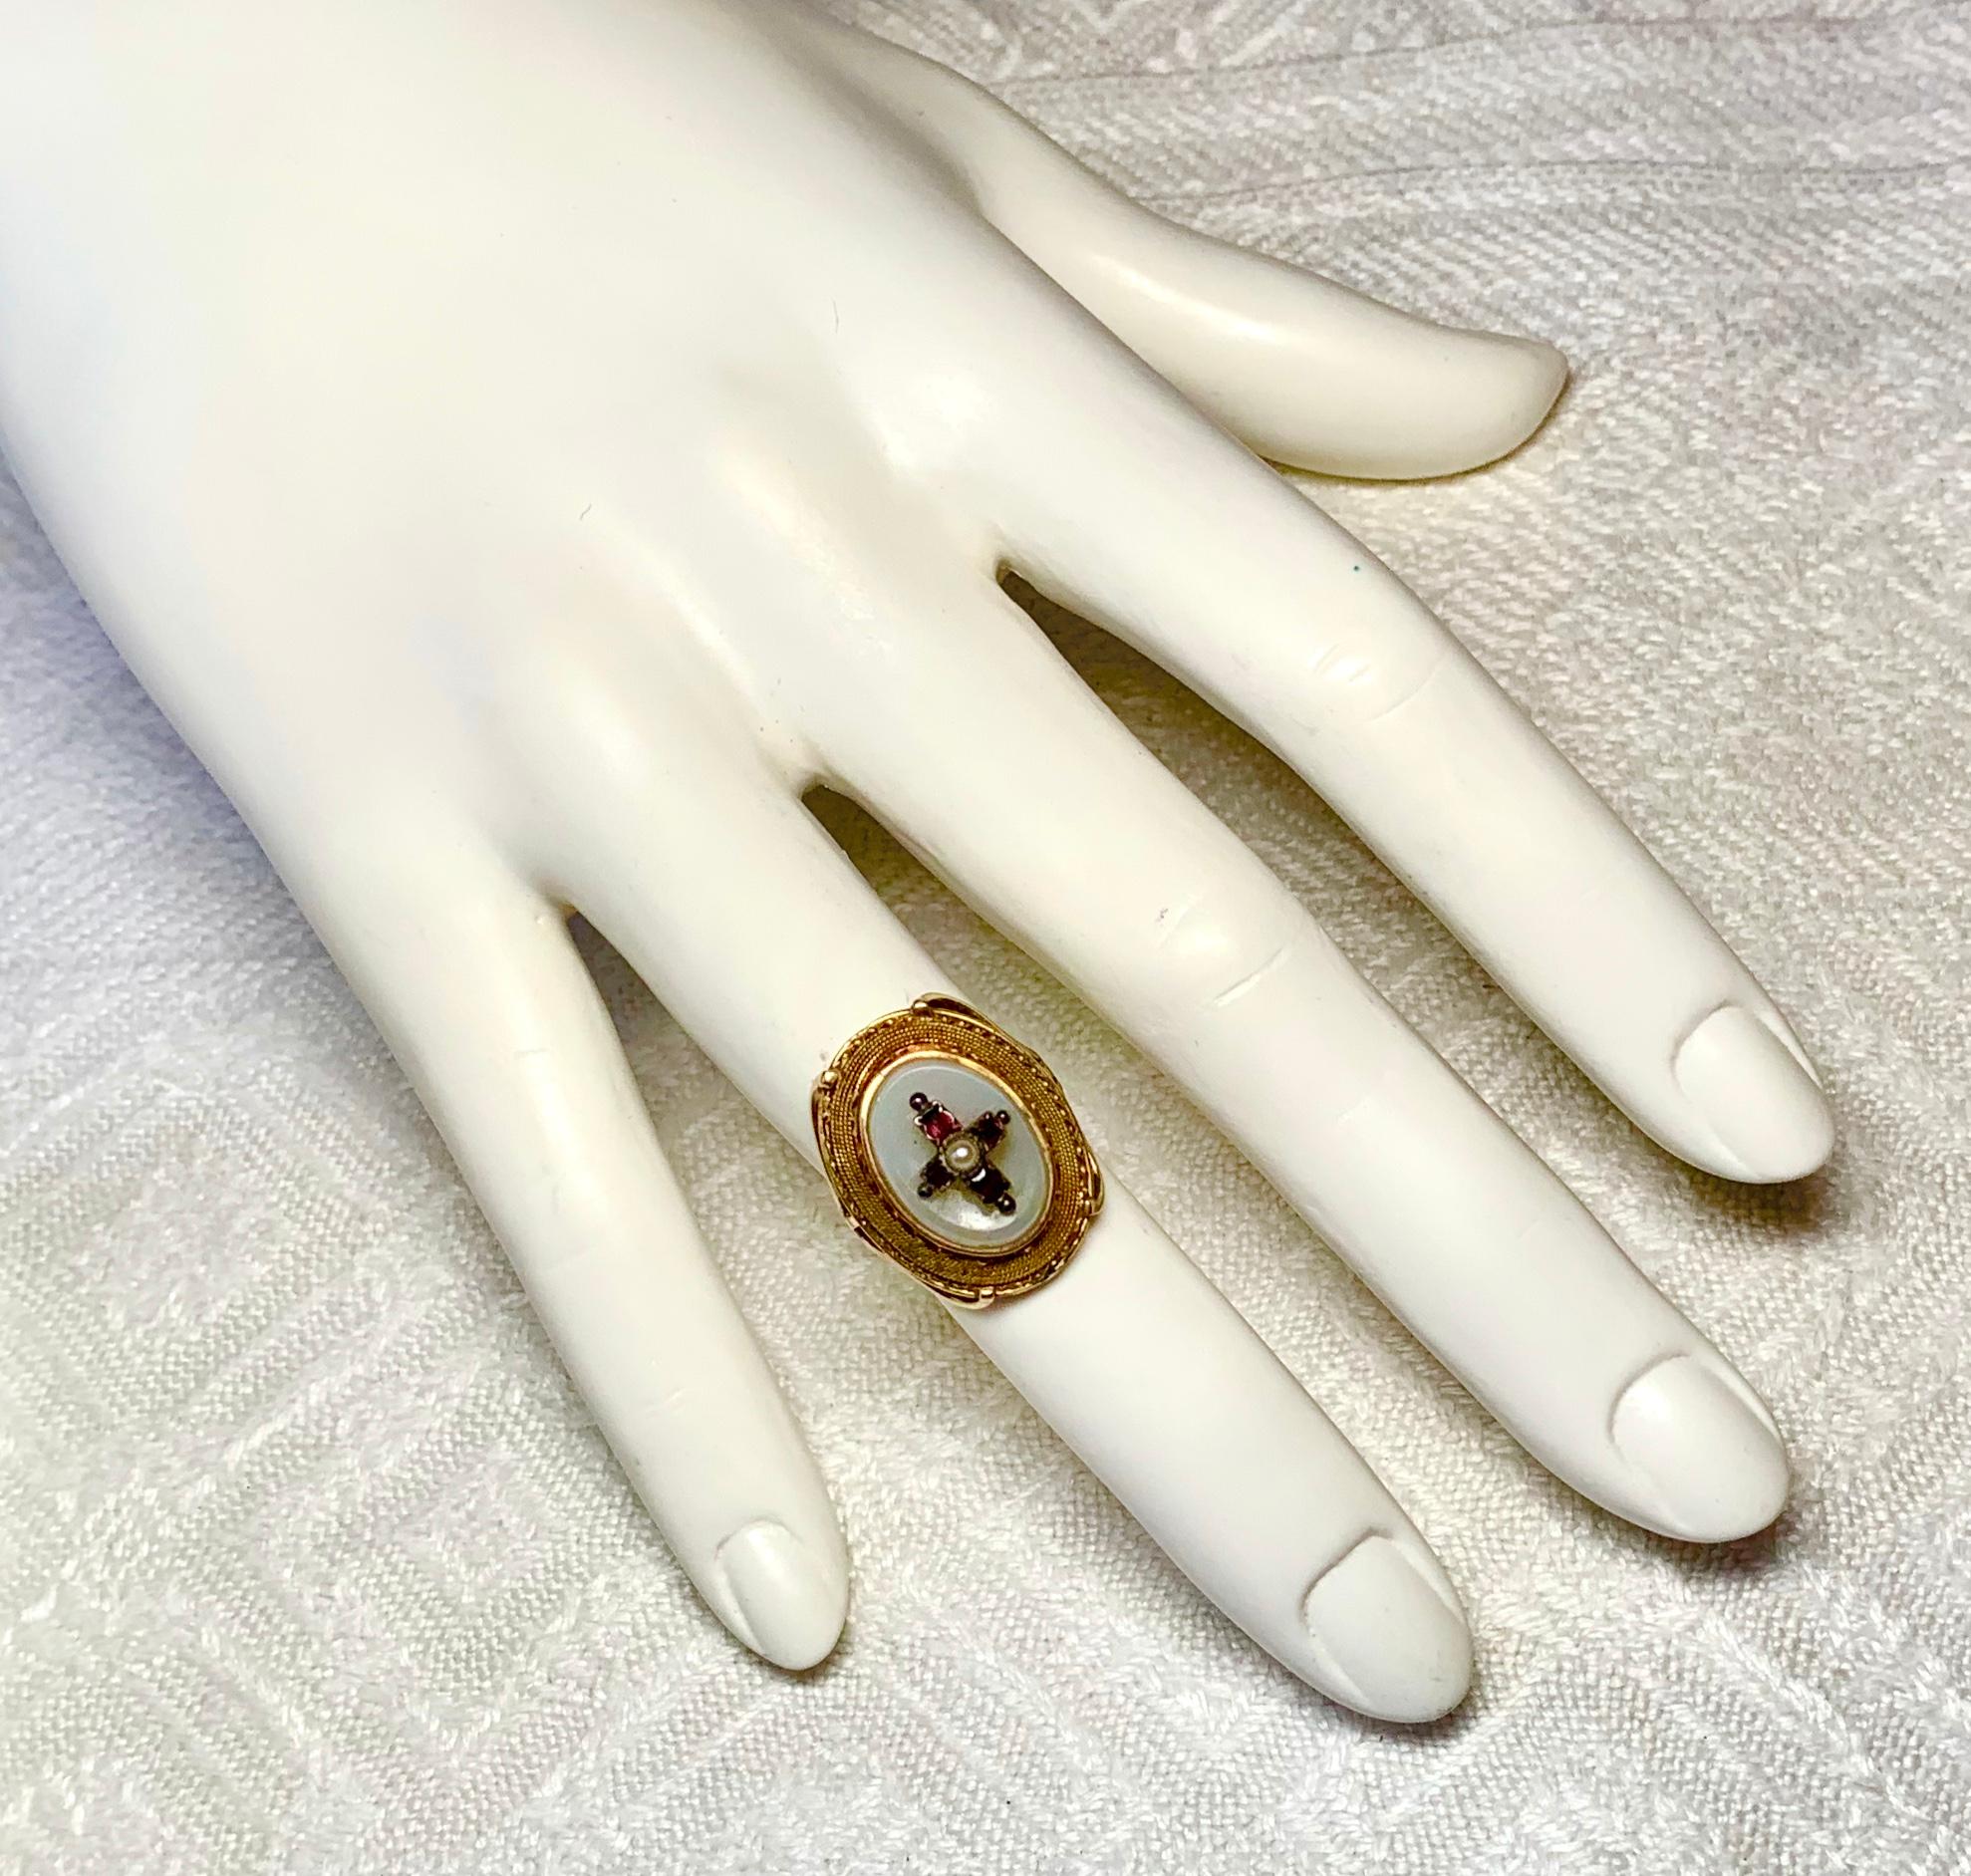 A gorgeous Antique Ring in the Etruscan Revival style with a Ruby Cross motif in the center set on a Chalcedony hardstone oval gem.  The jewels are set in 14 Karat Rose Gold.  The ring dates to the Victorian period, circa 1850-1890.  It has superb